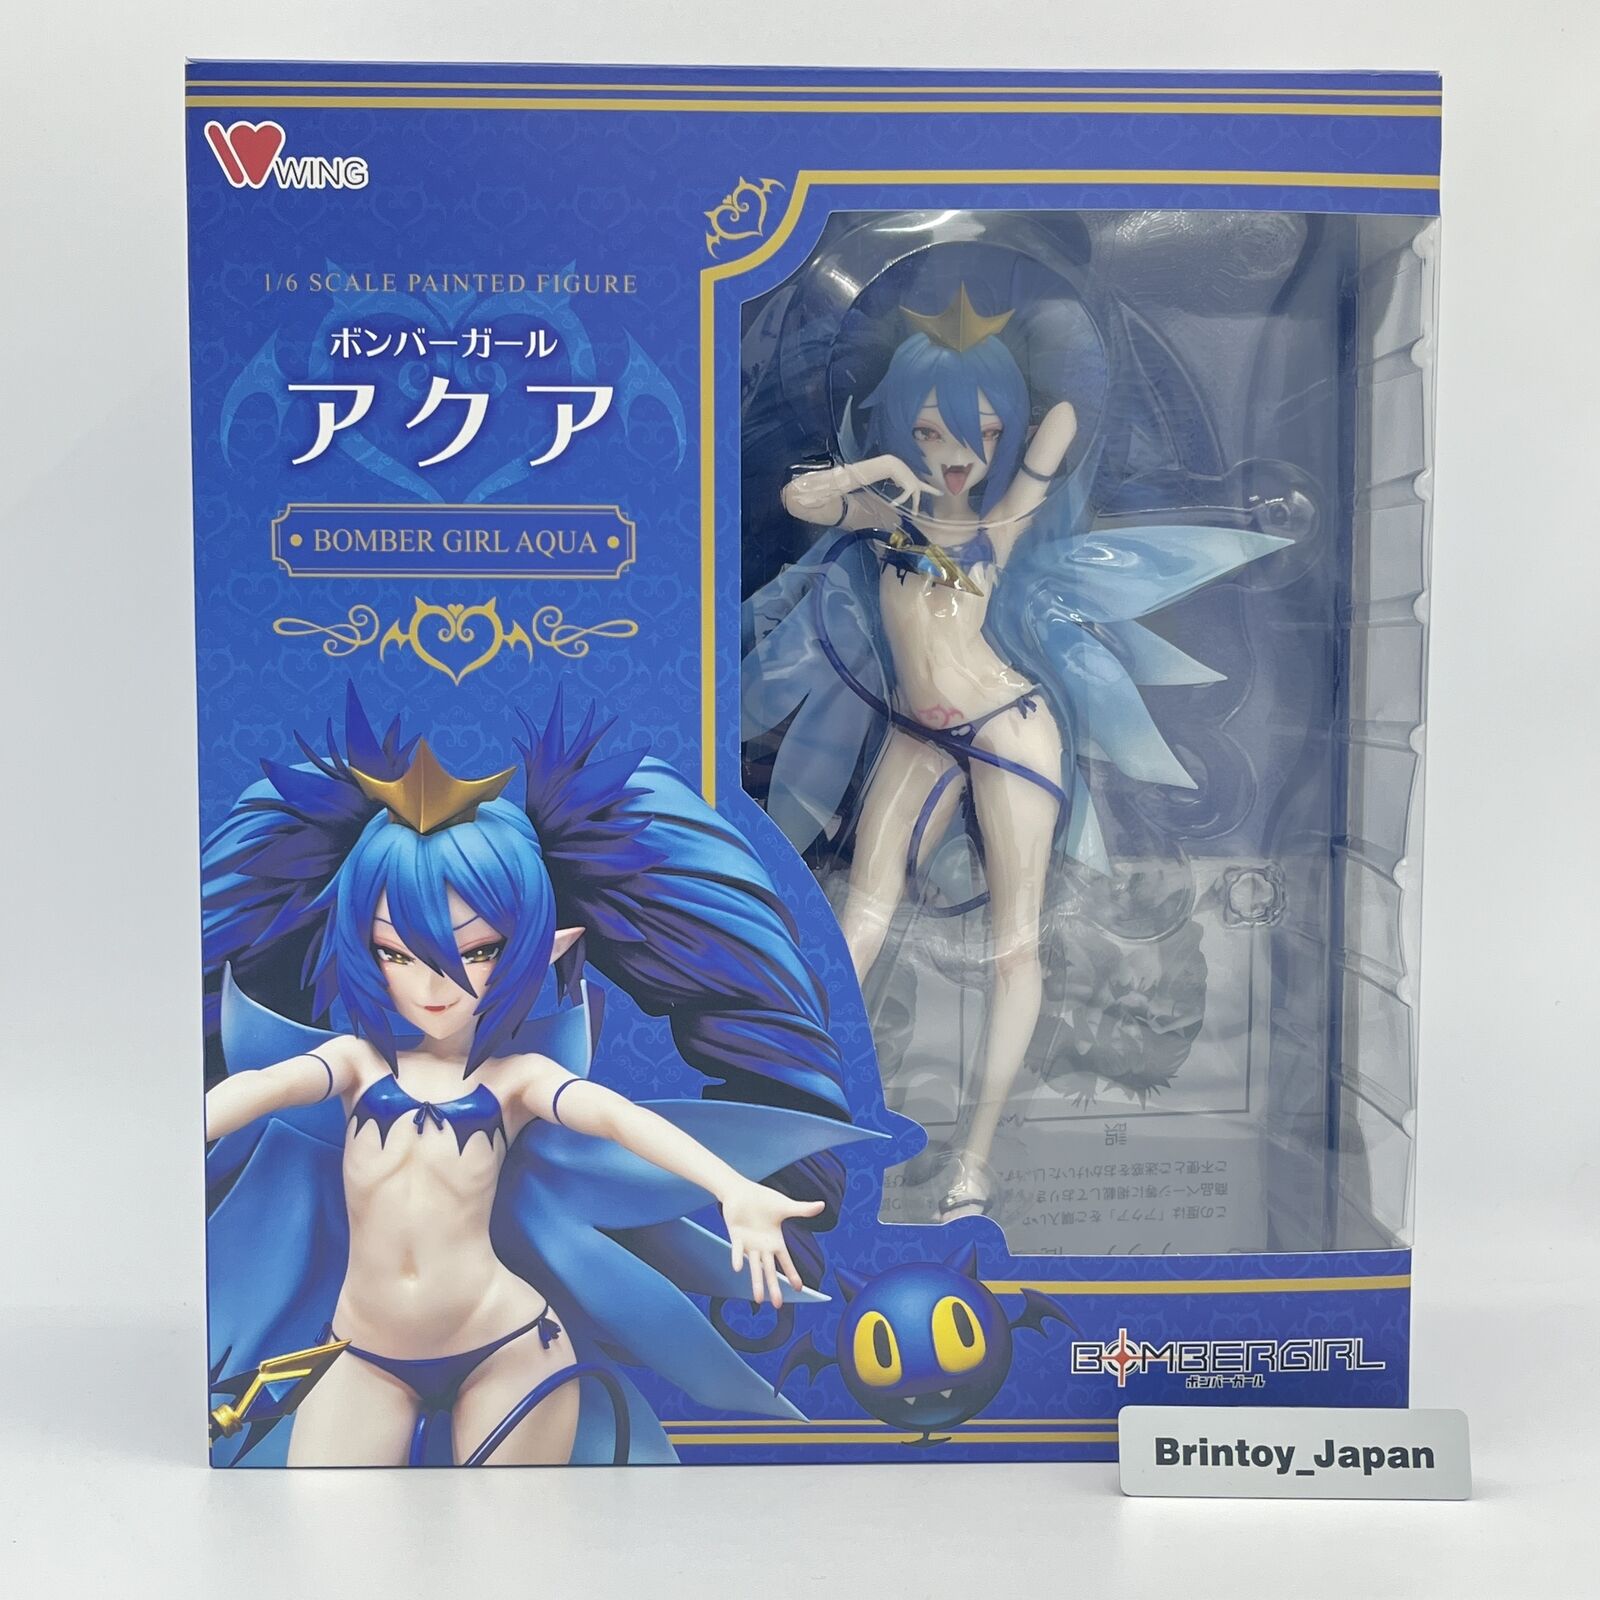 Wing Bomber Girl Aqua 1/6 Scale ABS PVC Painted Figure 14cm Unopned Box damage